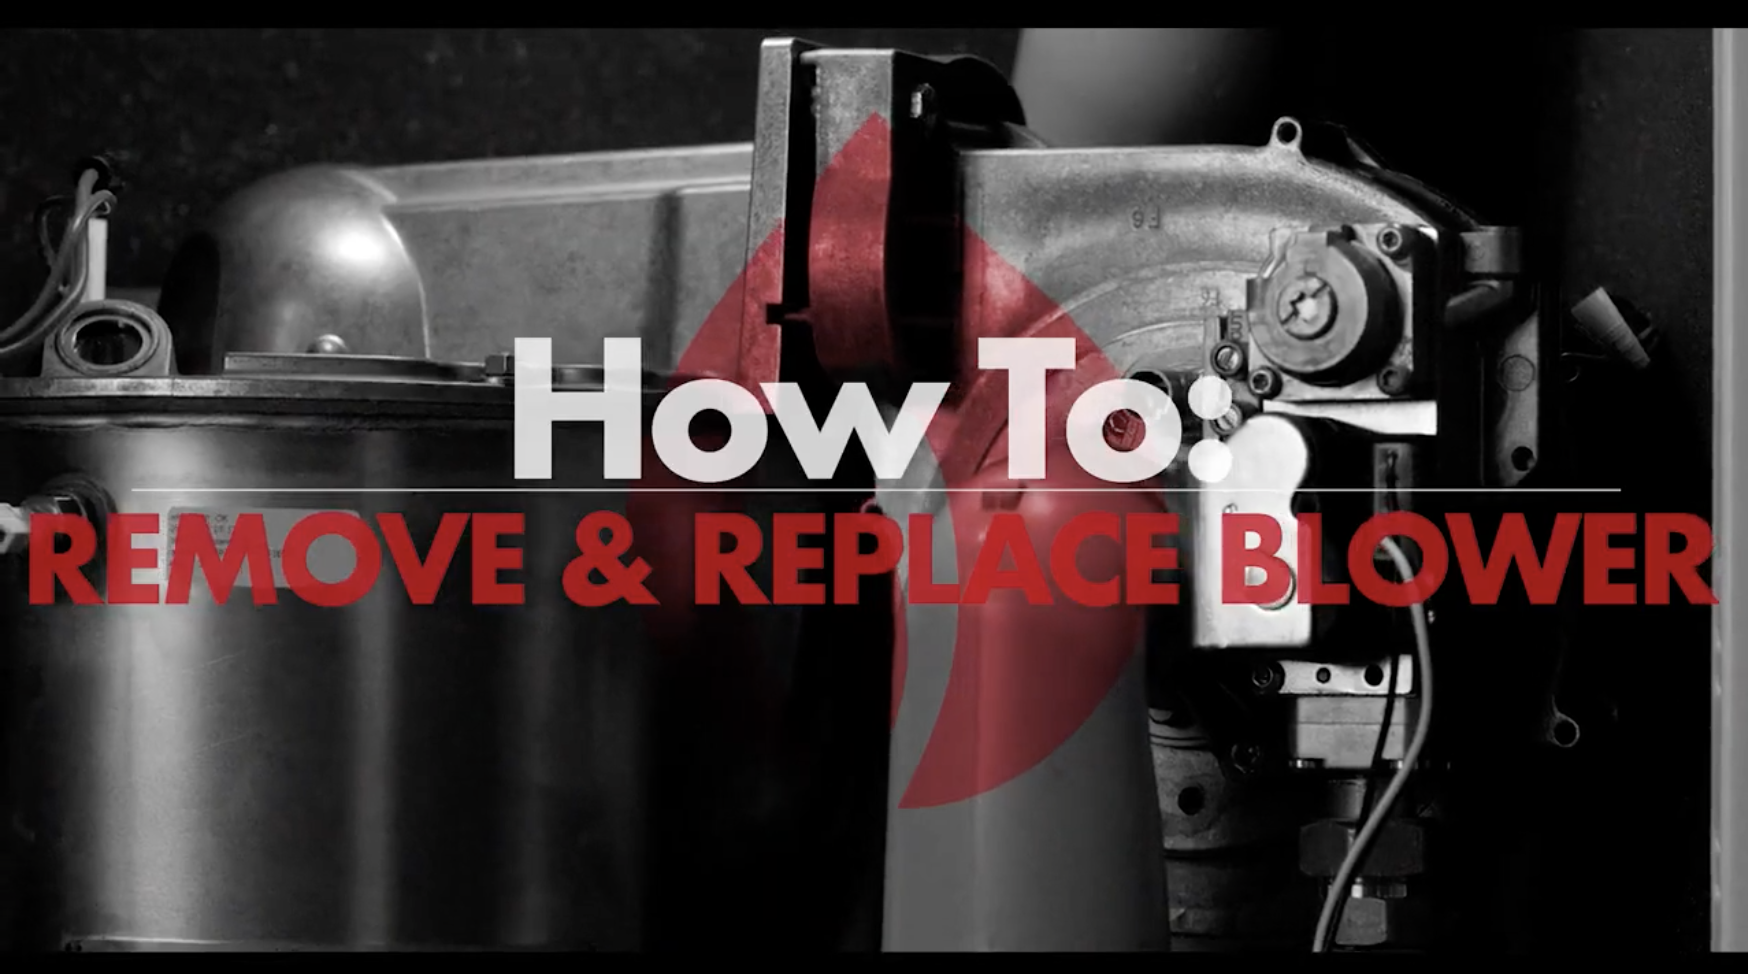 How To: Remove & Replace Blower